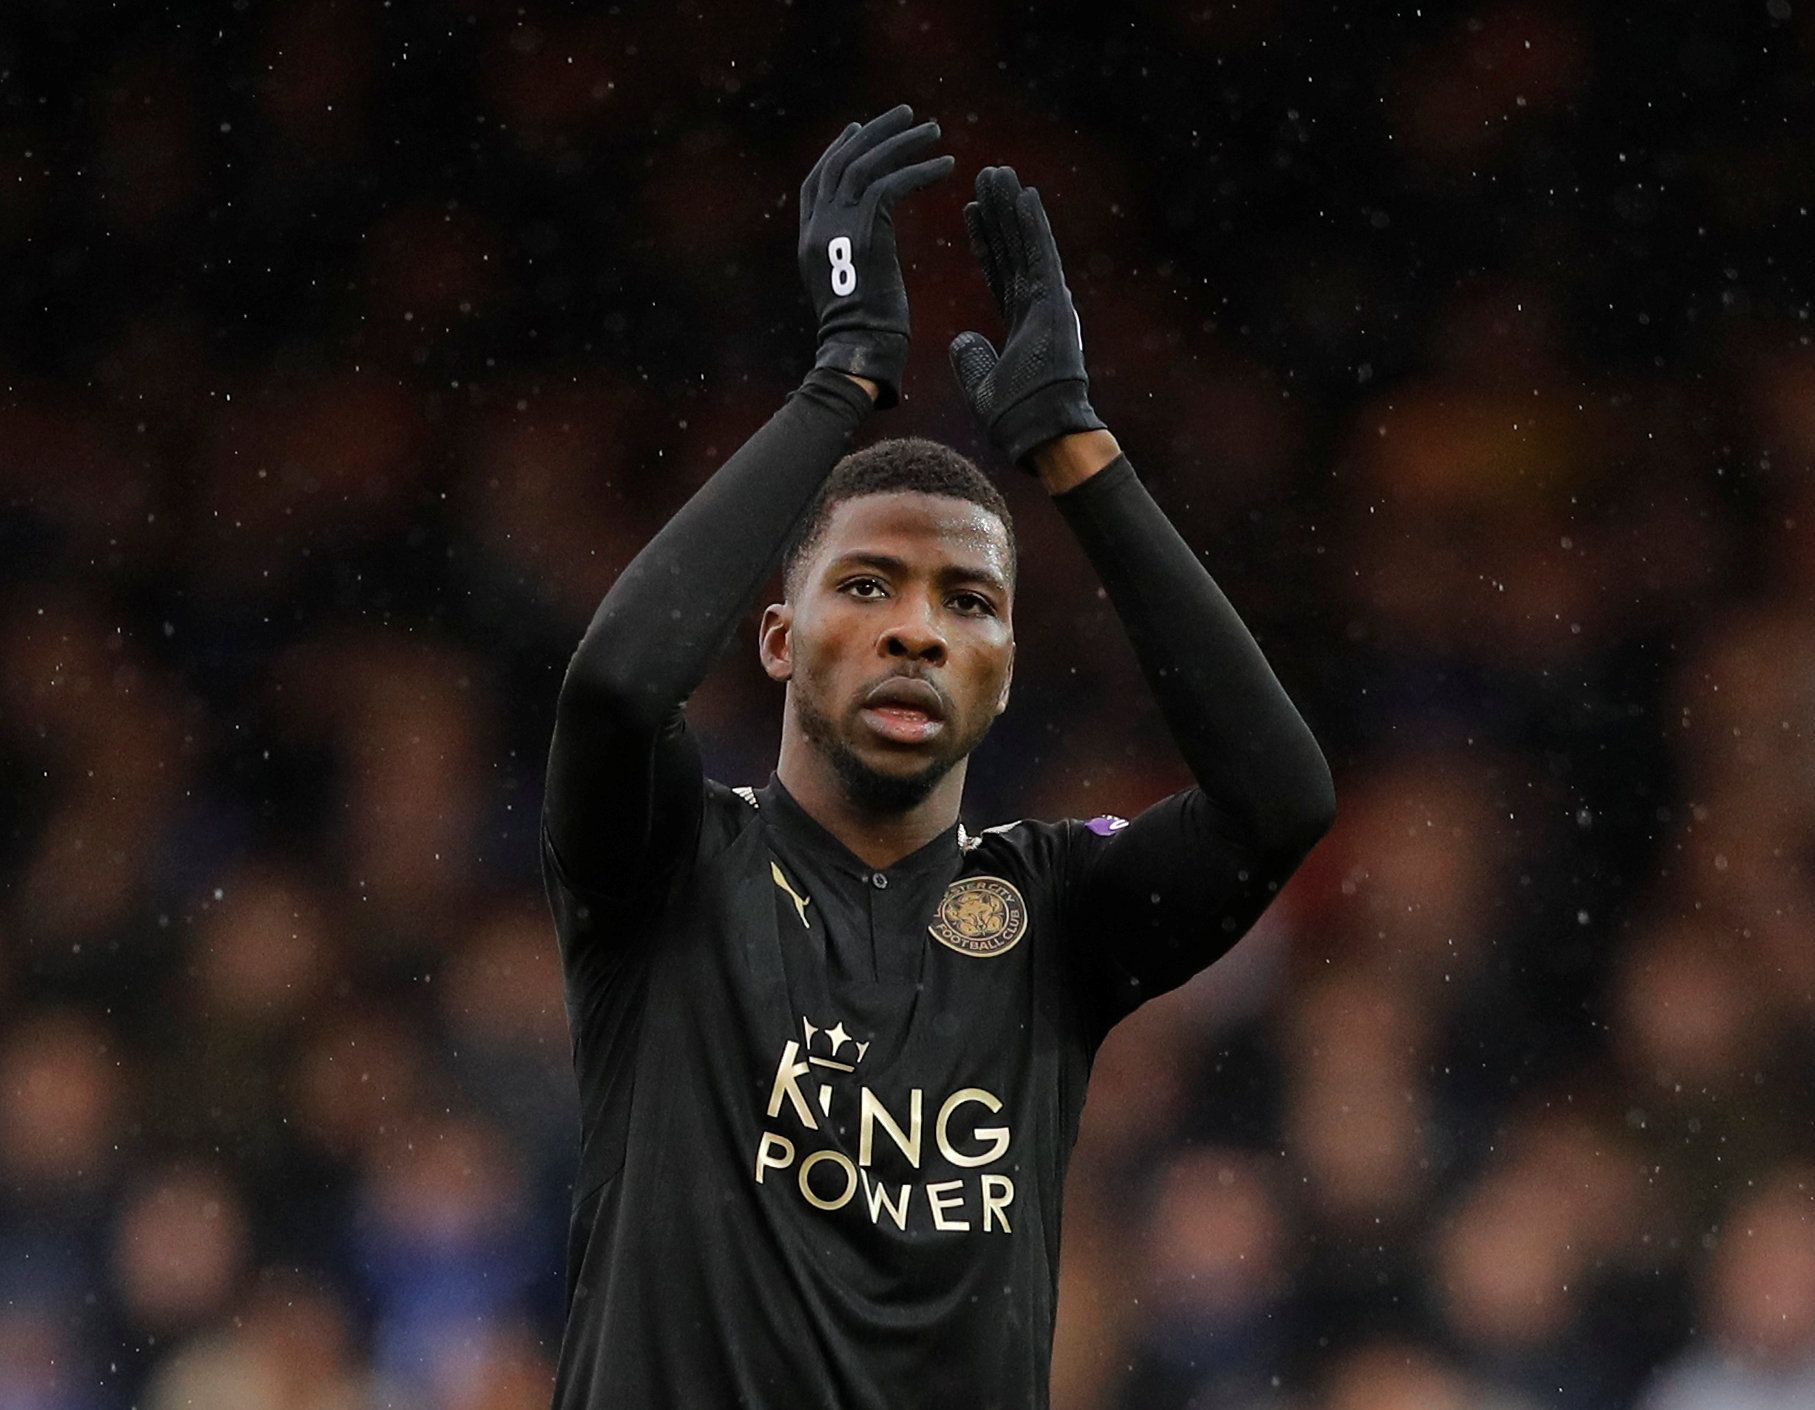 Soccer Football - FA Cup Fourth Round - Peterborough United vs Leicester City - ABAX Stadium, Peterborough, Britain - January 27, 2018   Leicester City's Kelechi Iheanacho applauds fans as he is substituted       REUTERS/Darren Staples